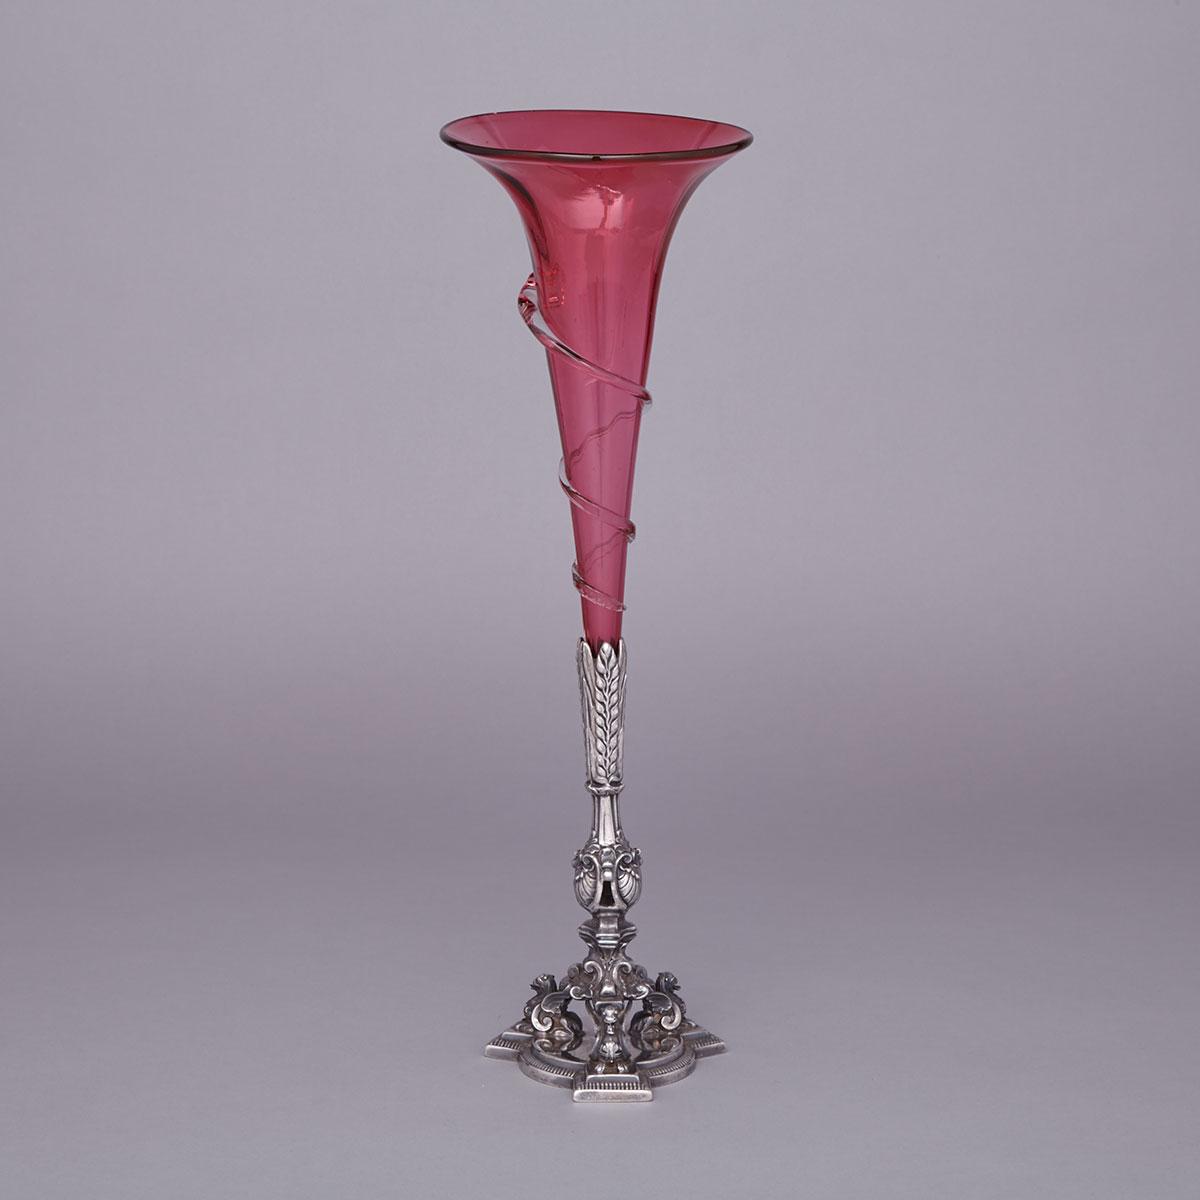 Victorian Cranberry Glass Trumpet Vase on Silver Plated Stand, 19th century